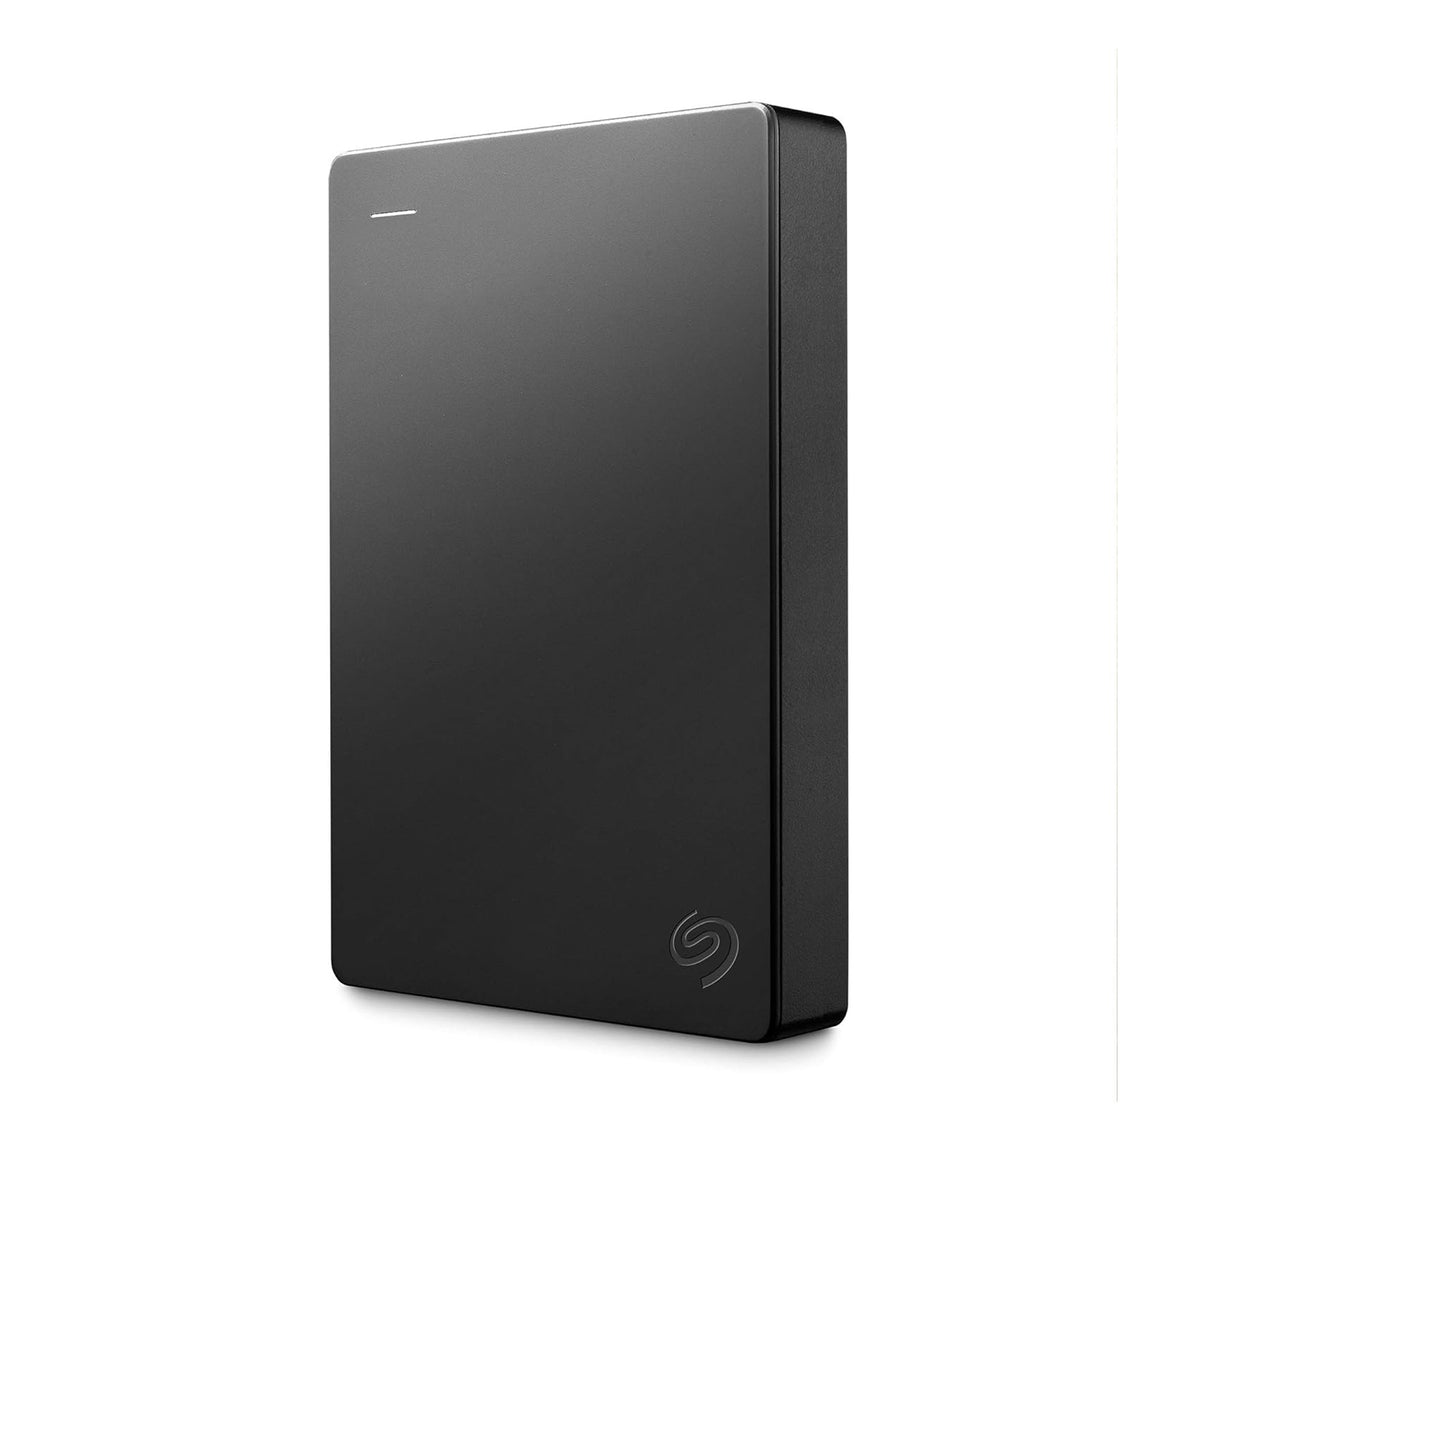 Seagate Portable 4TB External Hard Drive HDD – USB 3.0 for PC, Mac, Xbox, & Playstation & (STGD2000100) Game Drive for PS4 Systems 2TB External Hard Drive Portable HDD â€“ USB 3.0